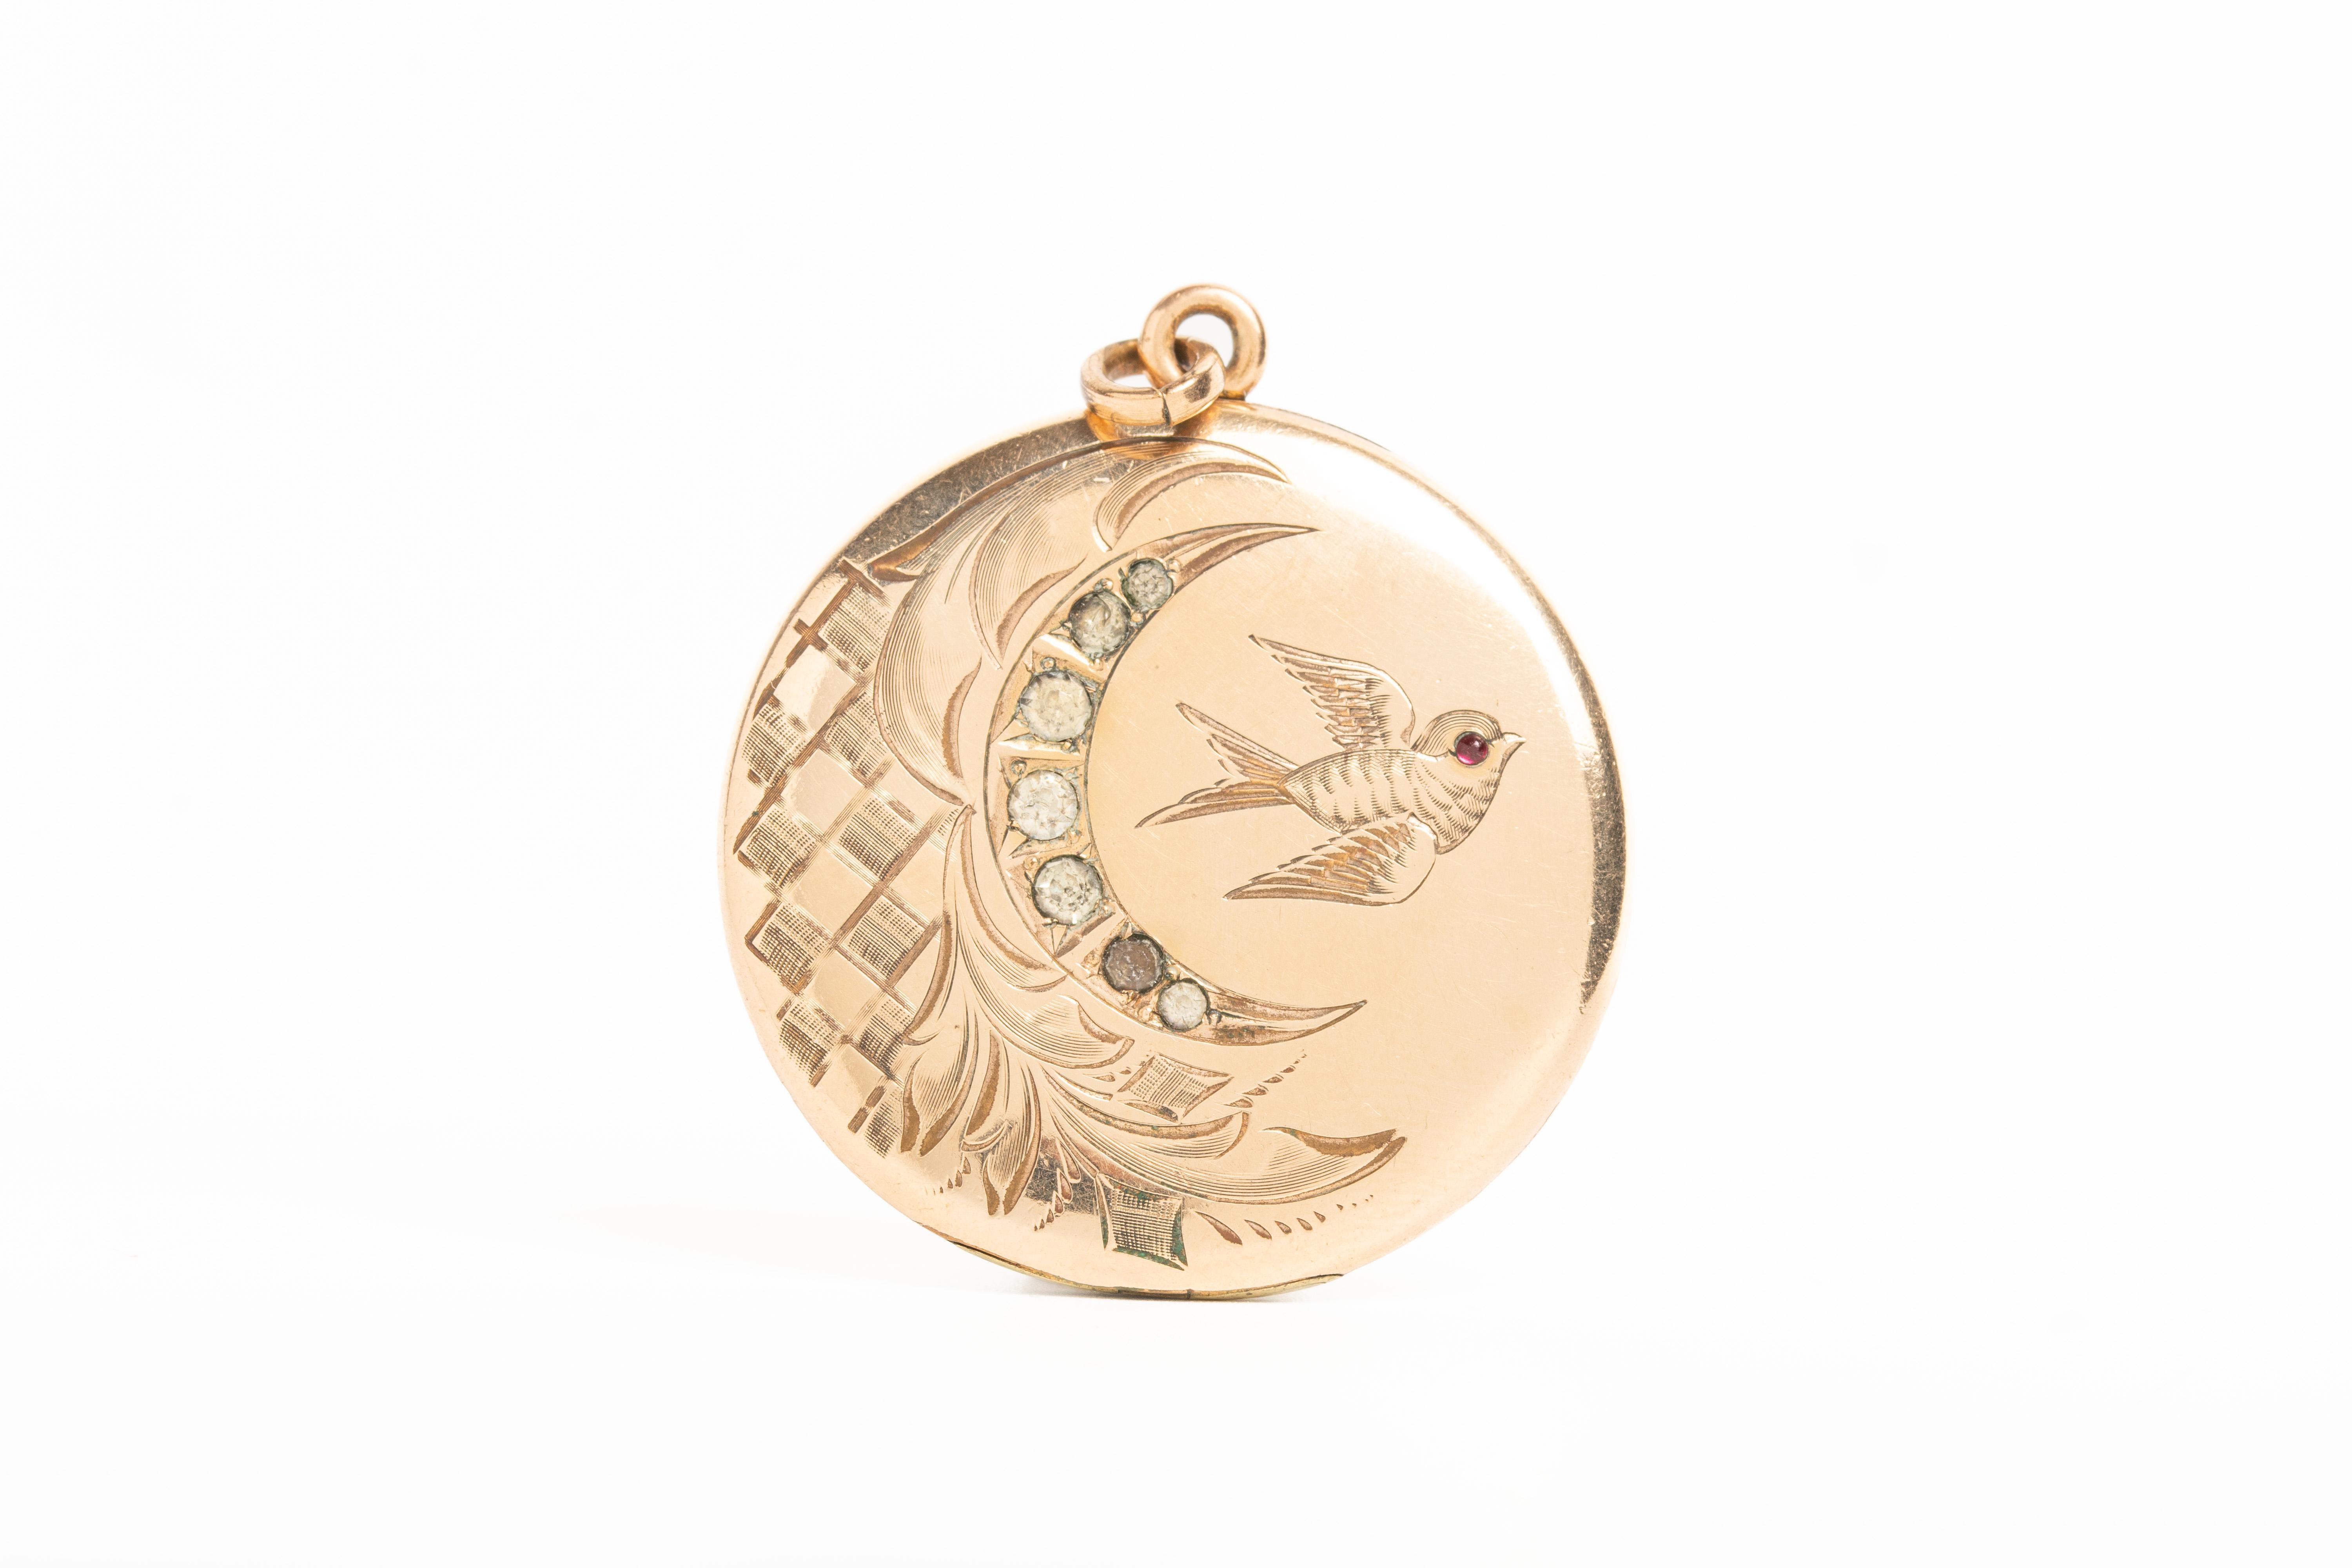 This rare antique Victorian crescent moon and a swallow locket was made circa 1890. Beautifully engraved with a crescent moon, a very popular symbol in Victorian jewellery and a symbol of changing of the seasons in one's life. 

Crescent moons also